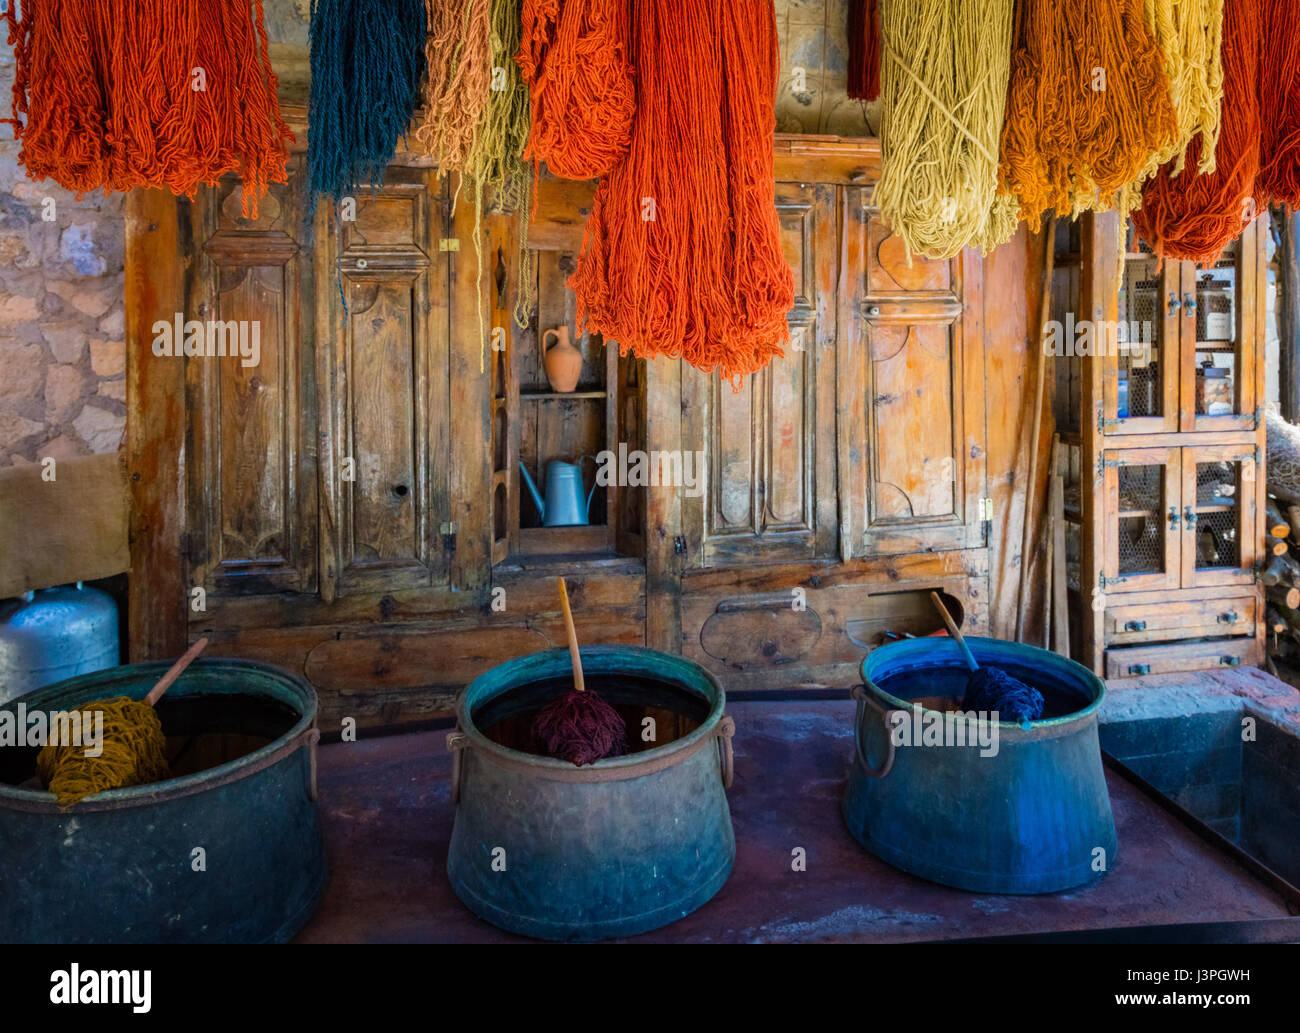 Yarn and dyes for rug making in Turkey Stock Photo